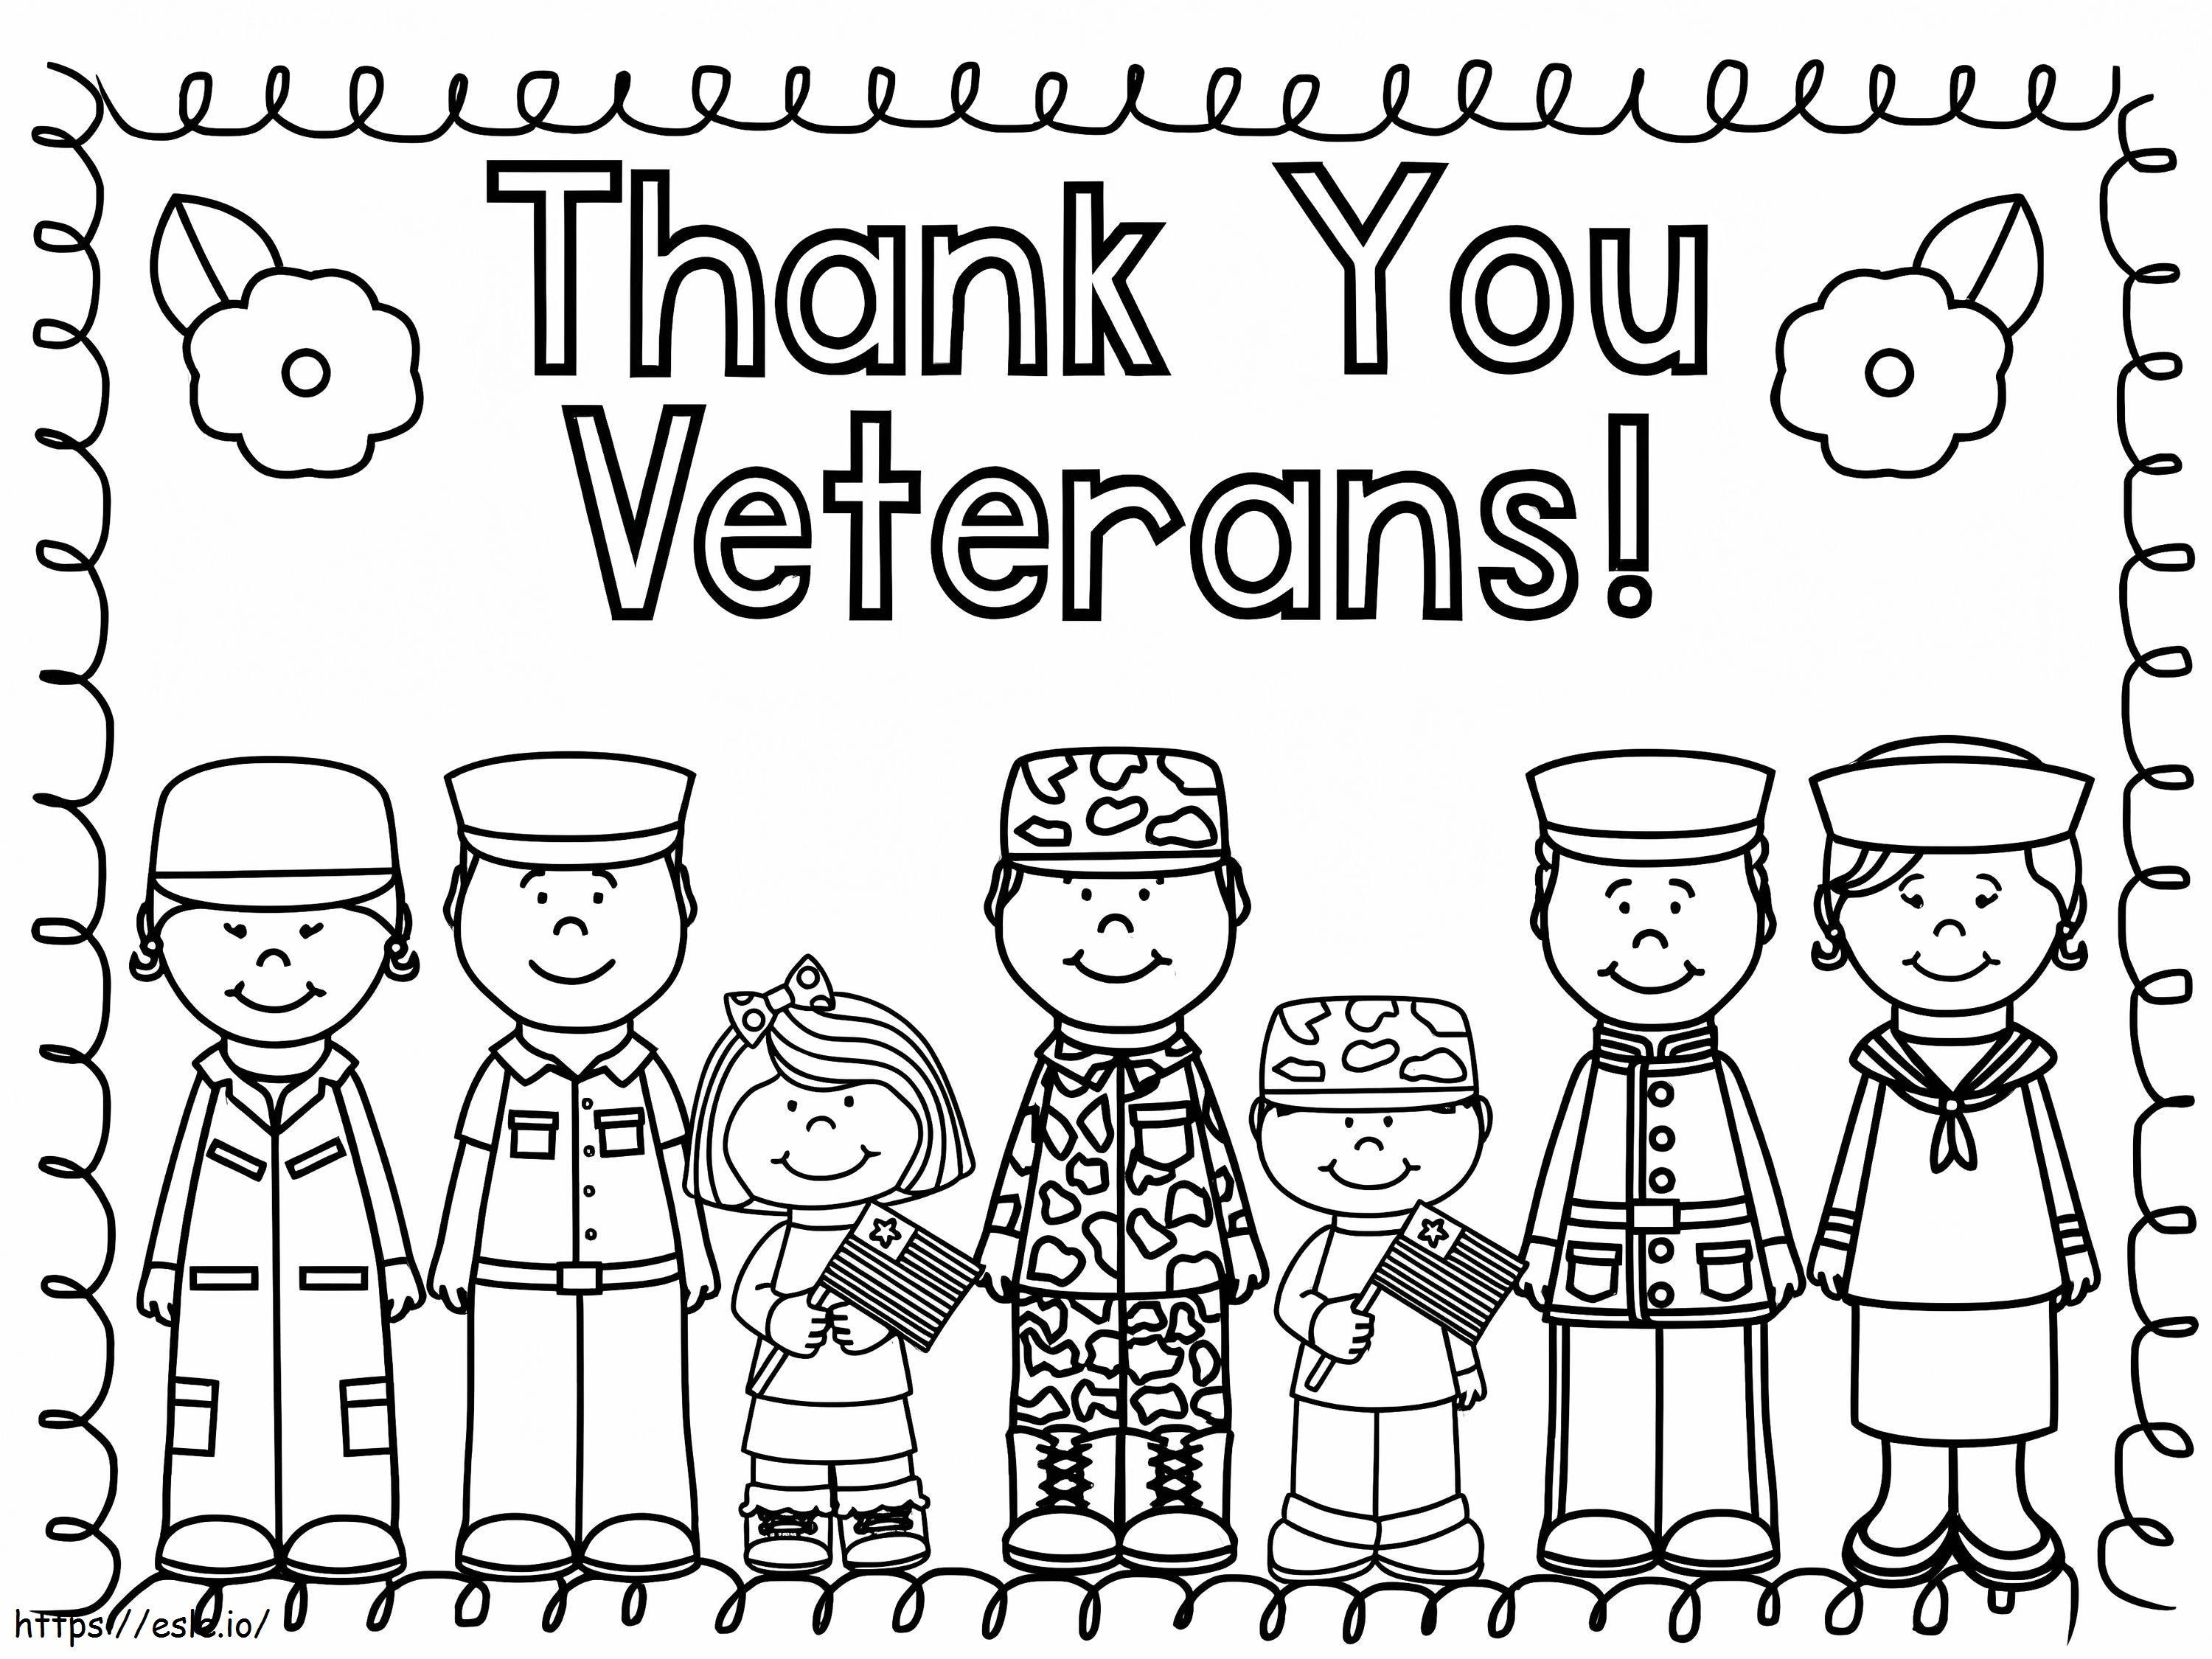 Basic Thank You Veterans coloring page